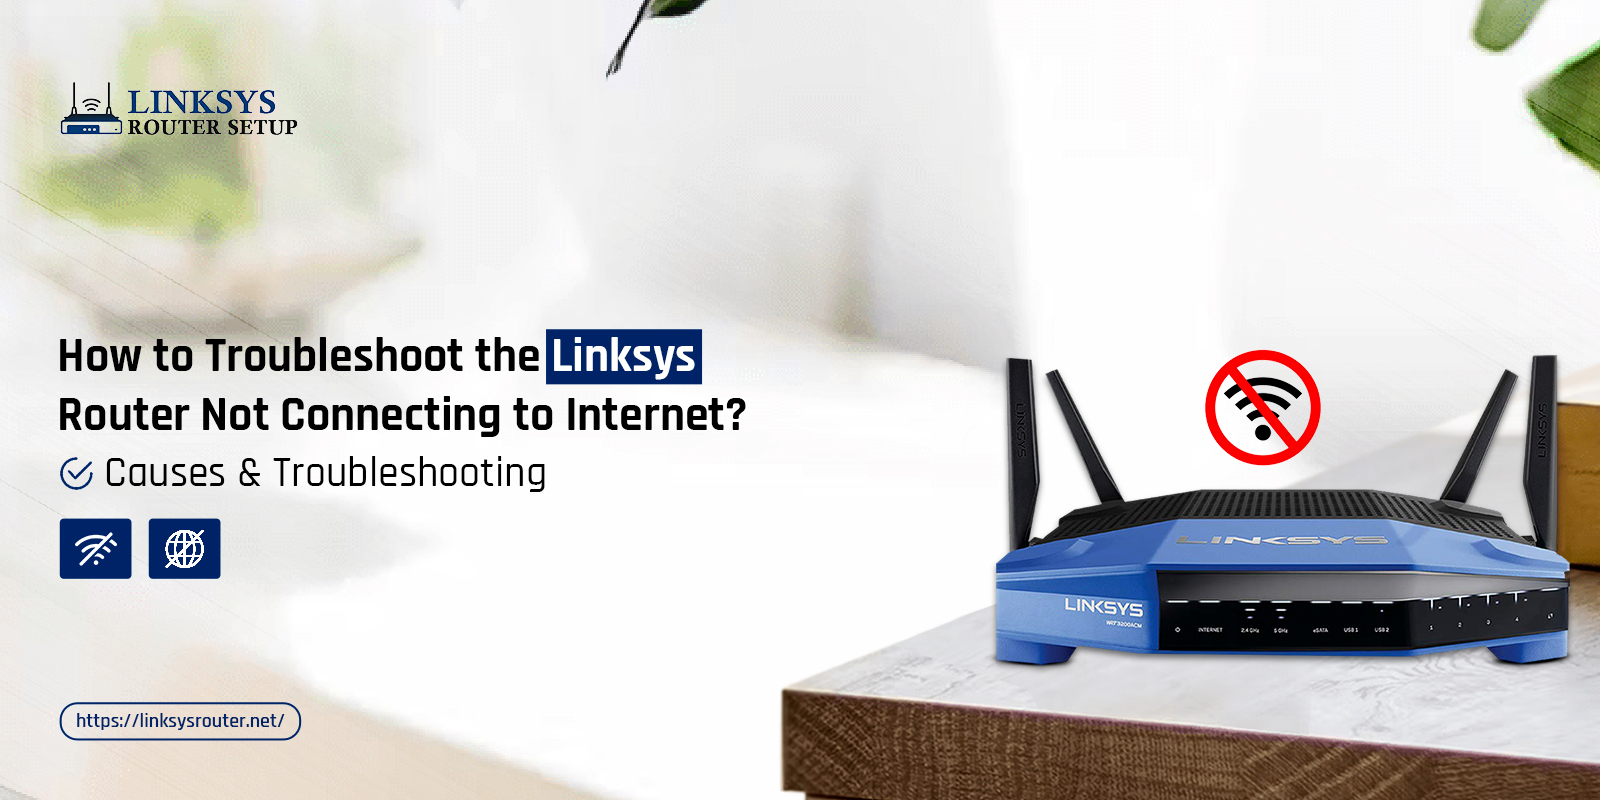 Linksys Router Not Connecting to Internet